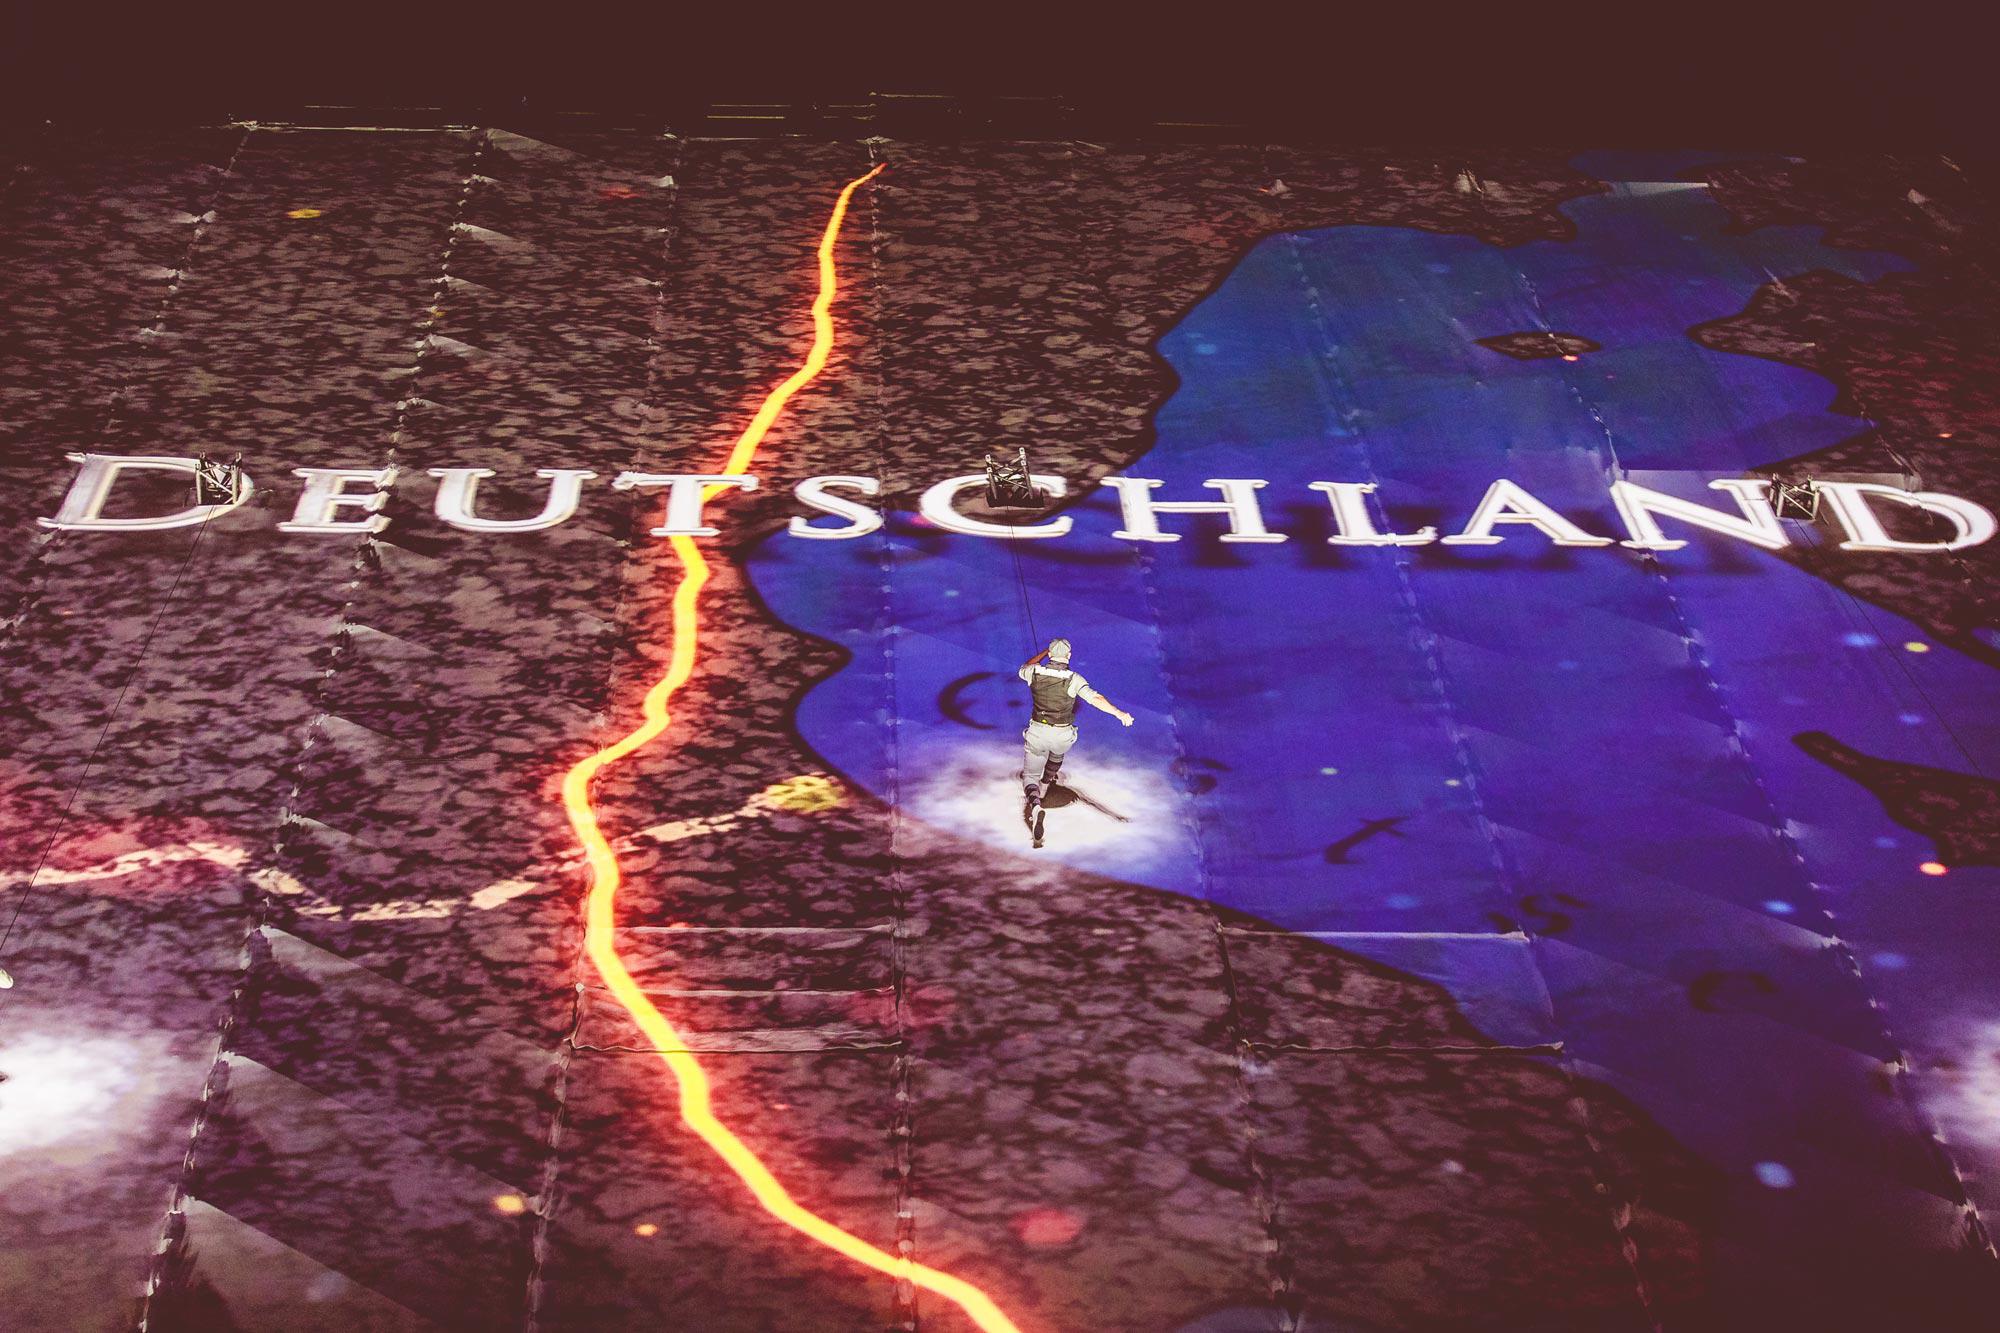 A performer runs up a large vertical wall with "DEUTSCHLAND" video mapped onto it.